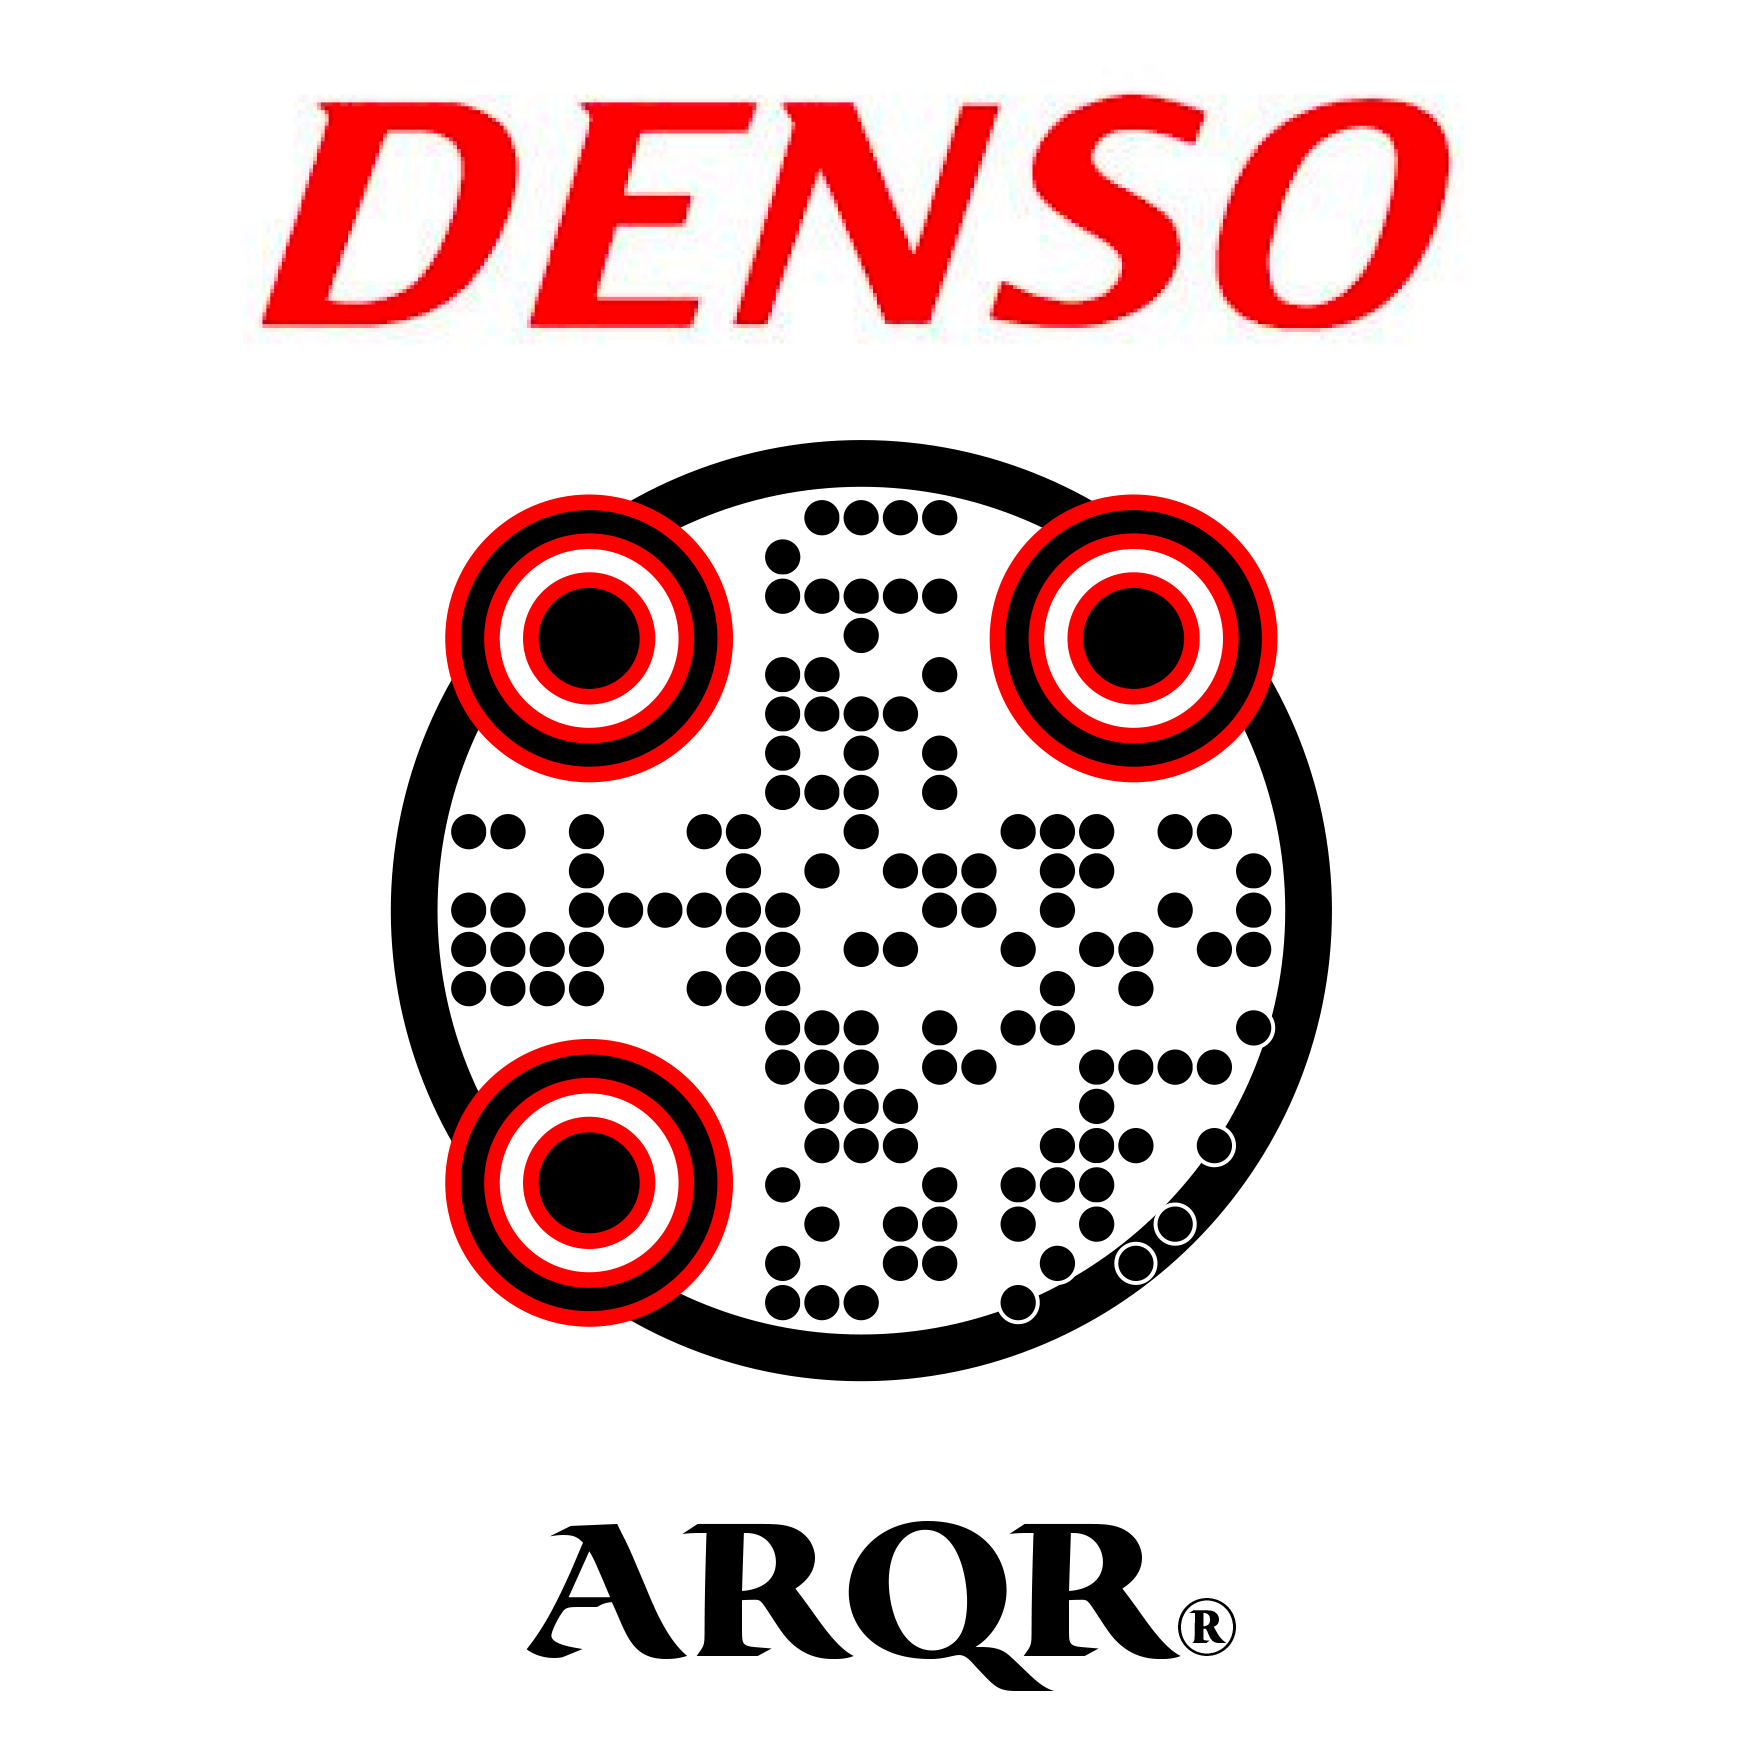 Denso Wave ARQR Code by Laird Marynick links to bit.ly/Dwv